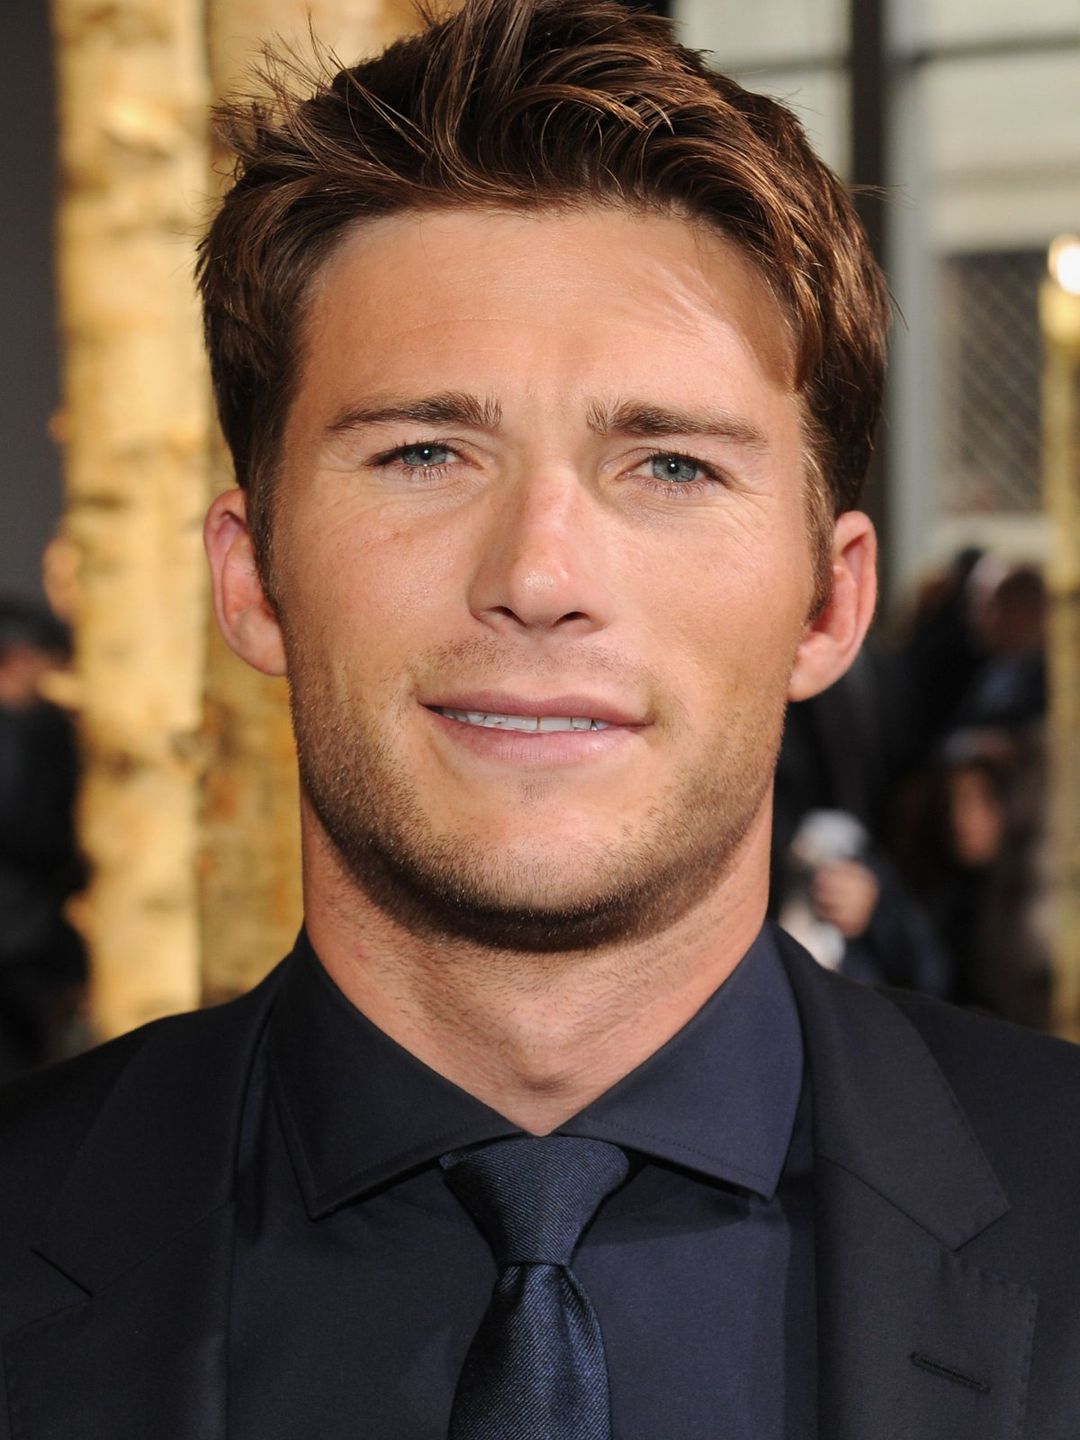 Scott Eastwood does he have a wife